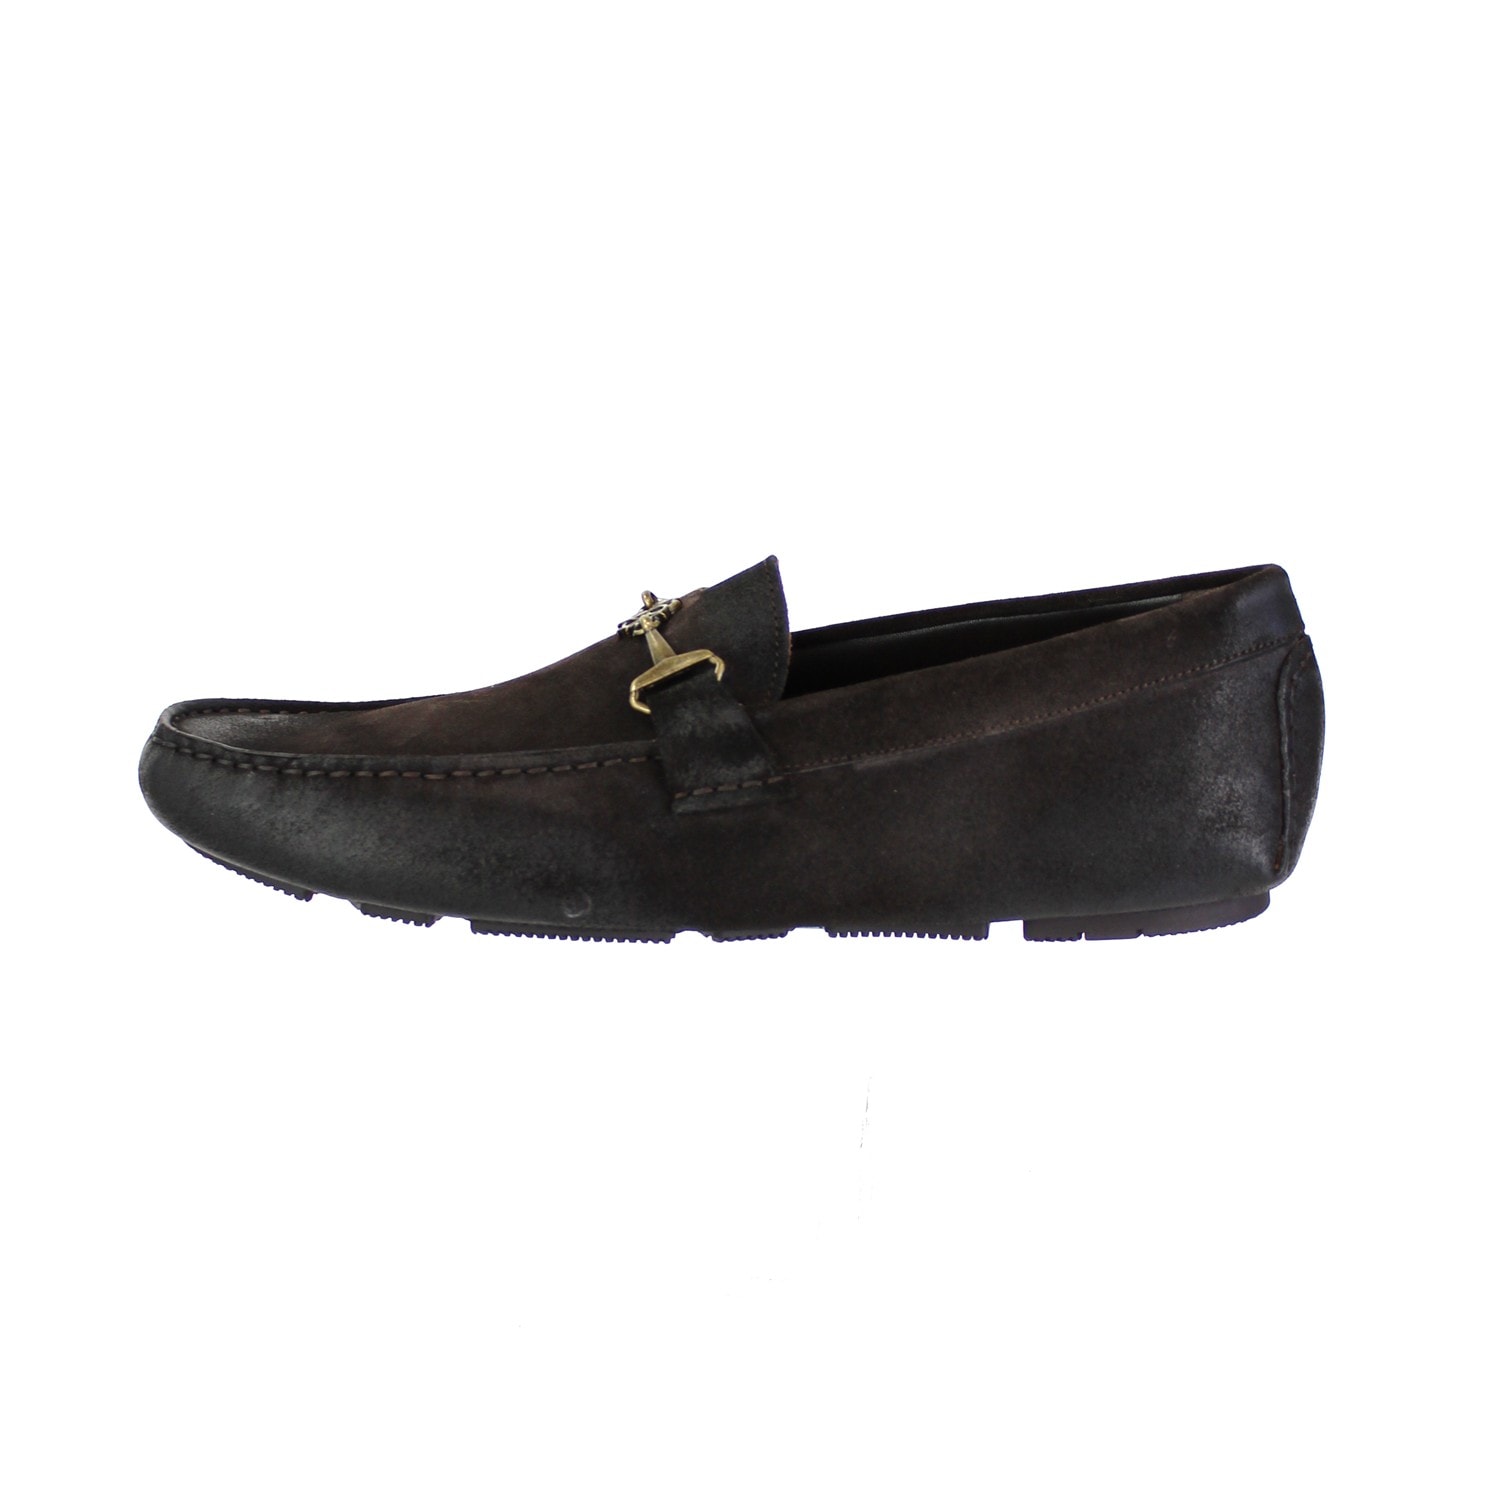 Roberto Cavalli Mens T. Moro Suede Loafers Today $309.99